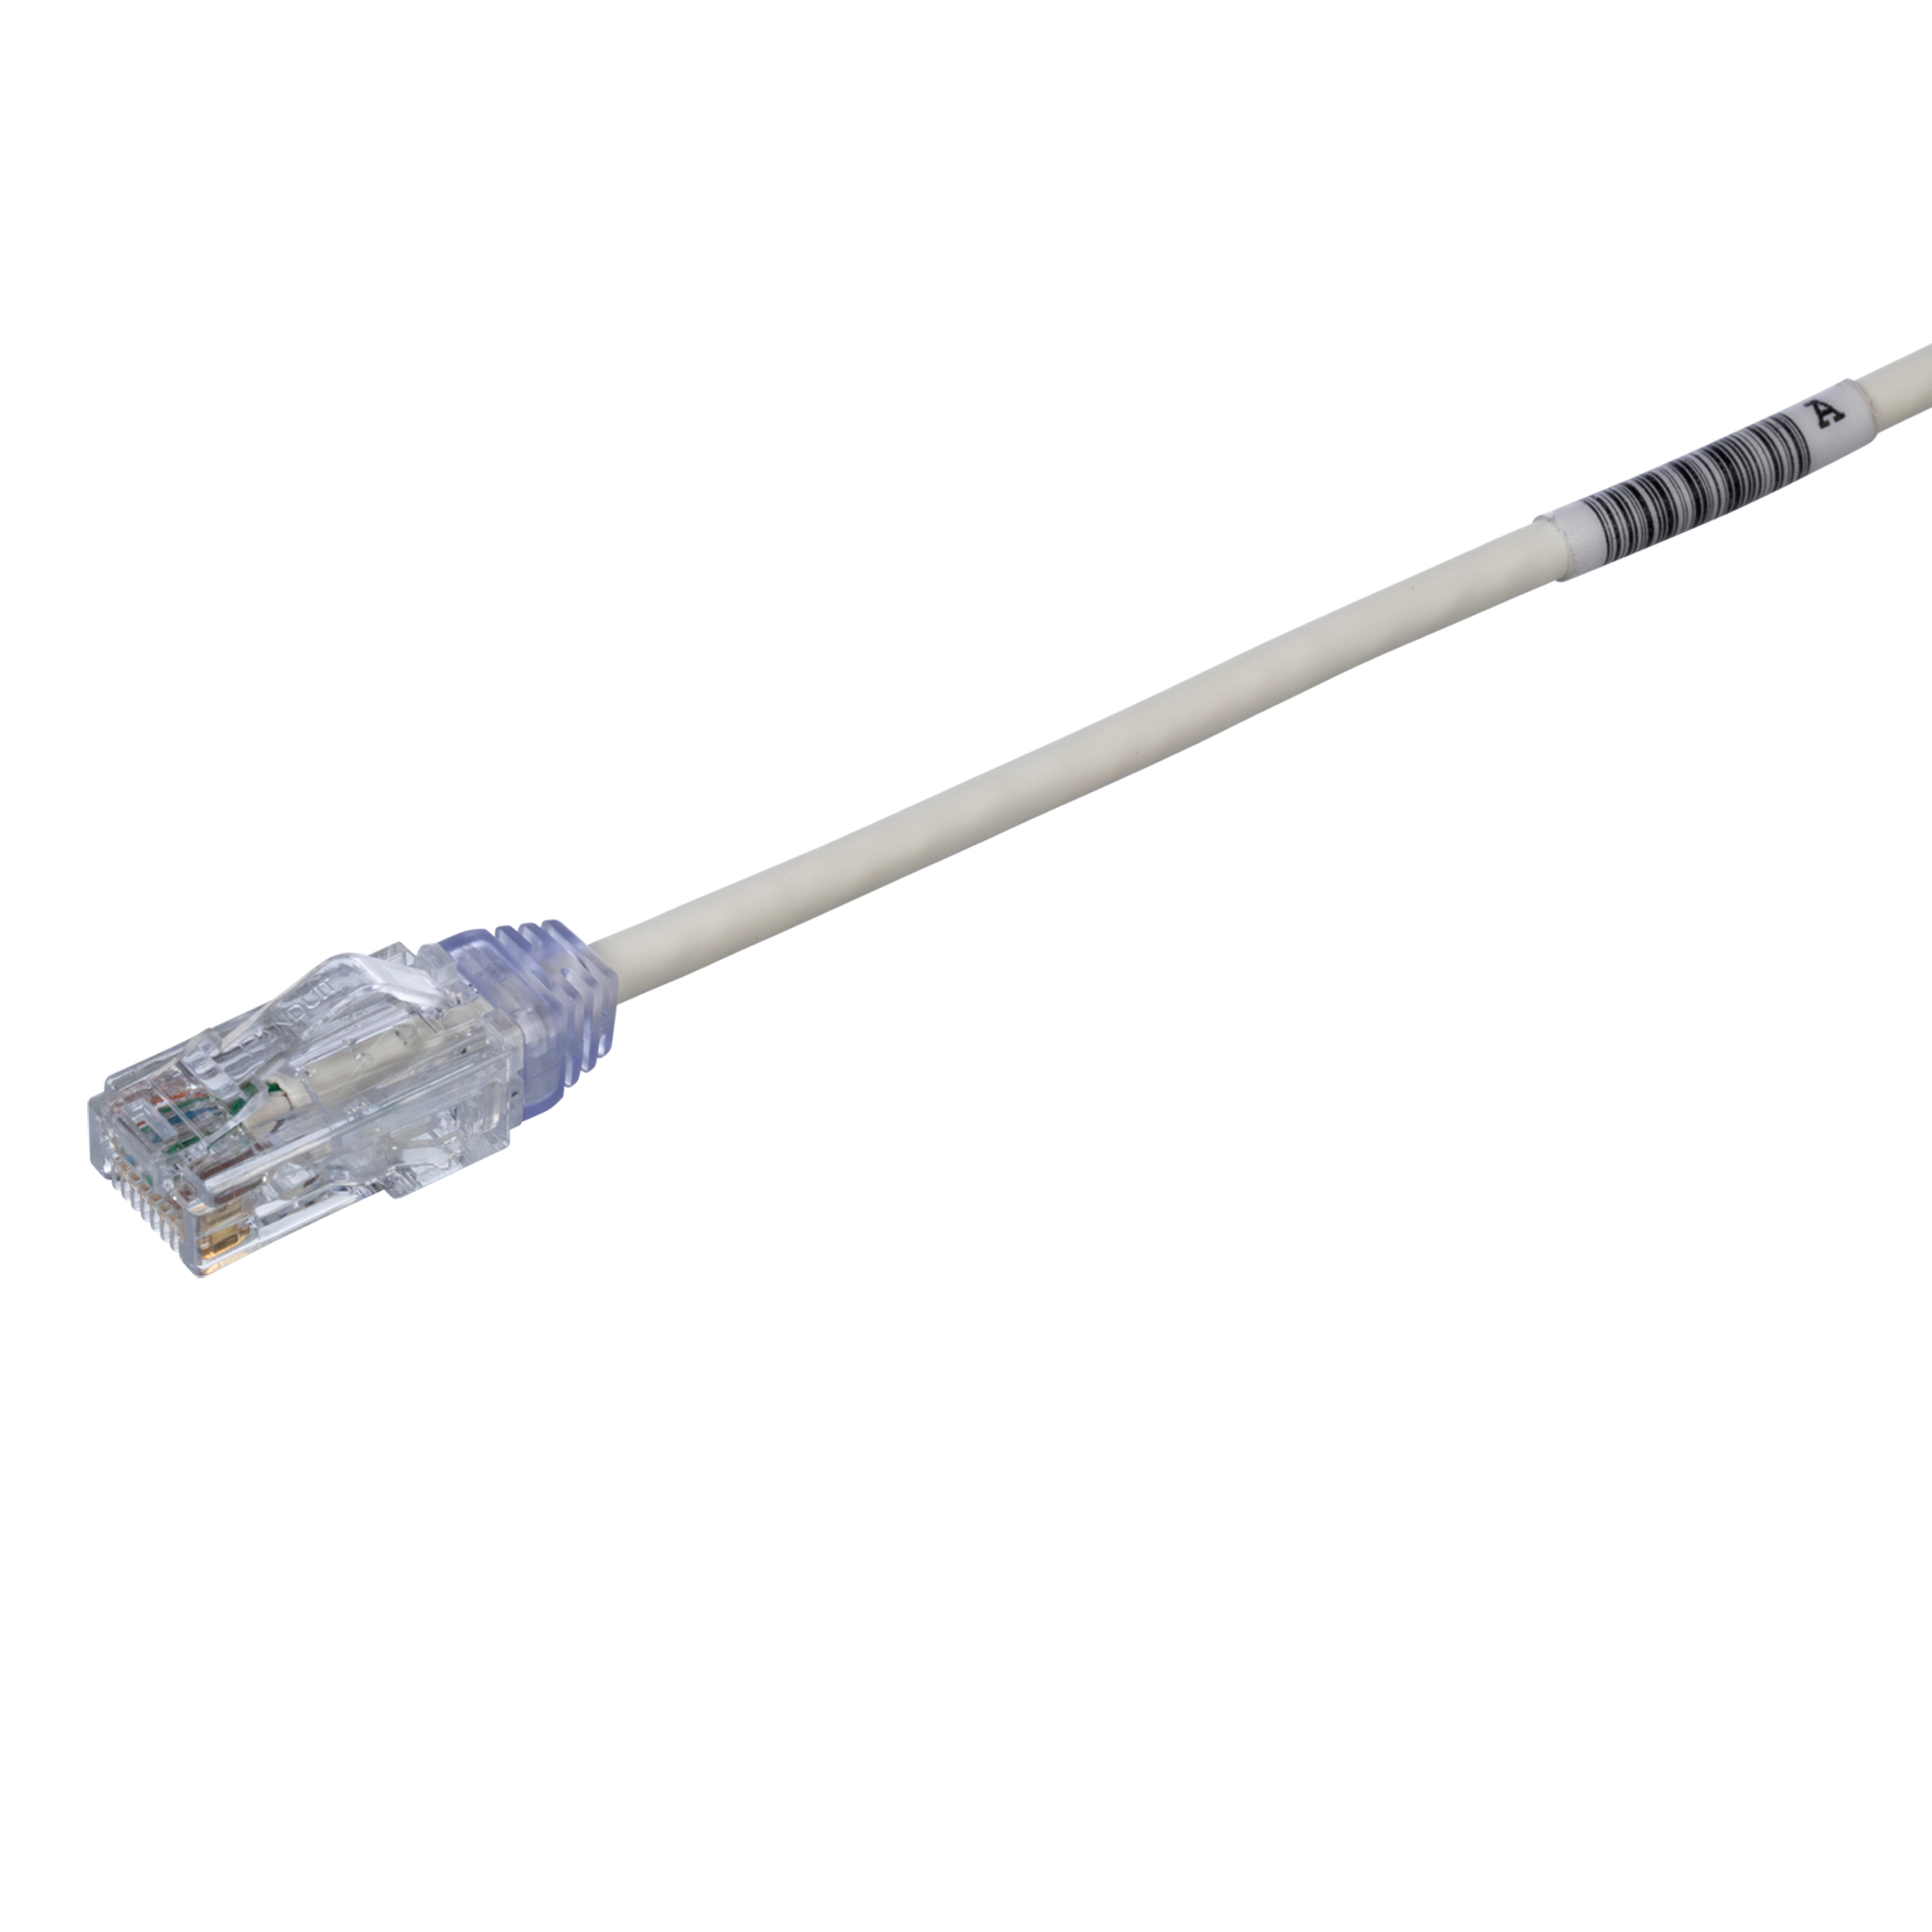 Cat 6 28 AWG UTP Copper Patch Cord